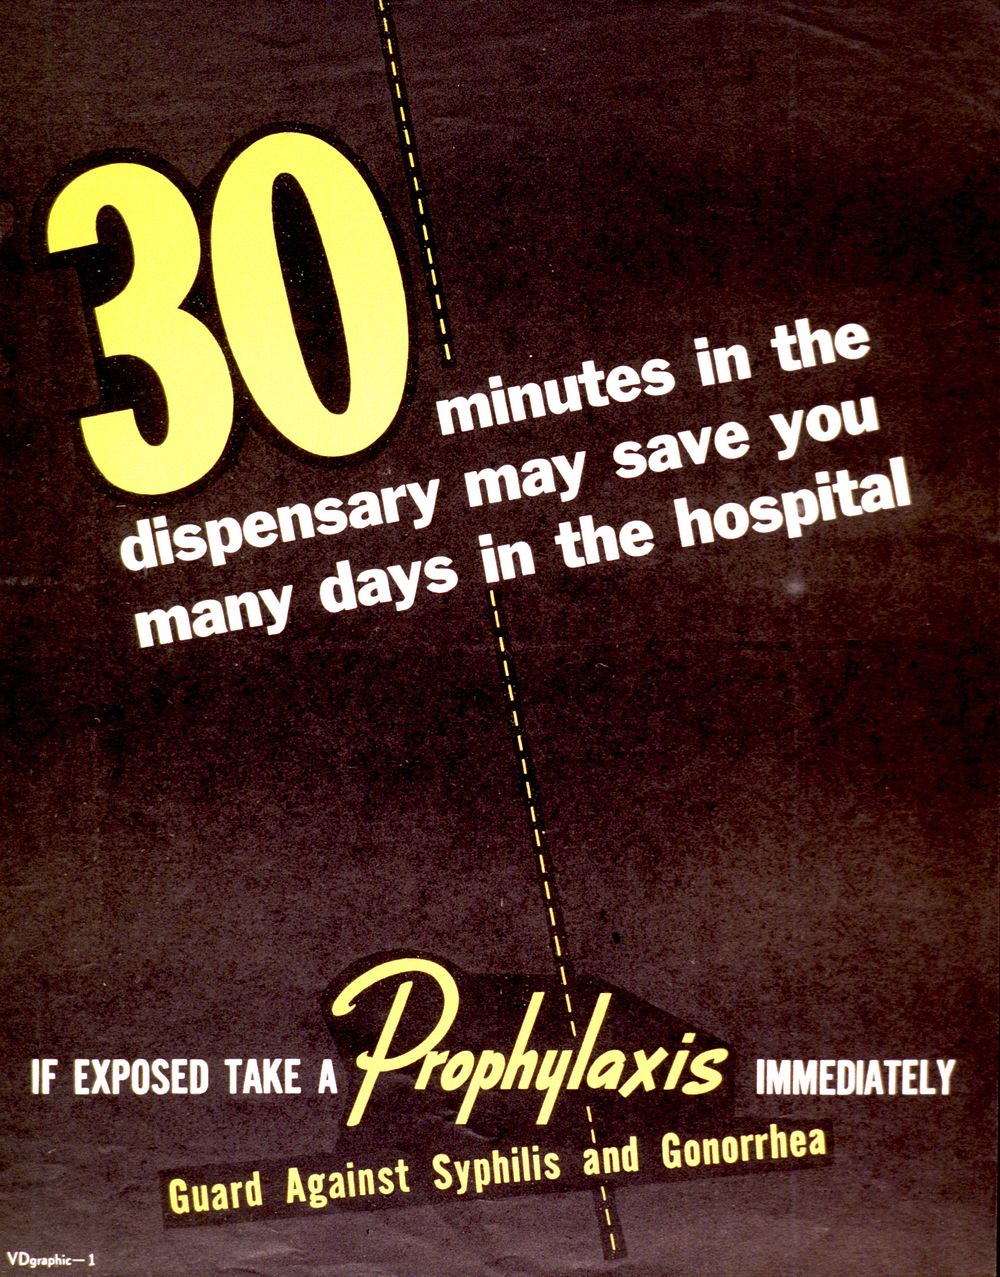 30 minutes in the dispensary may save you many days in the hospitalCollection:Images from the History of Medicine…